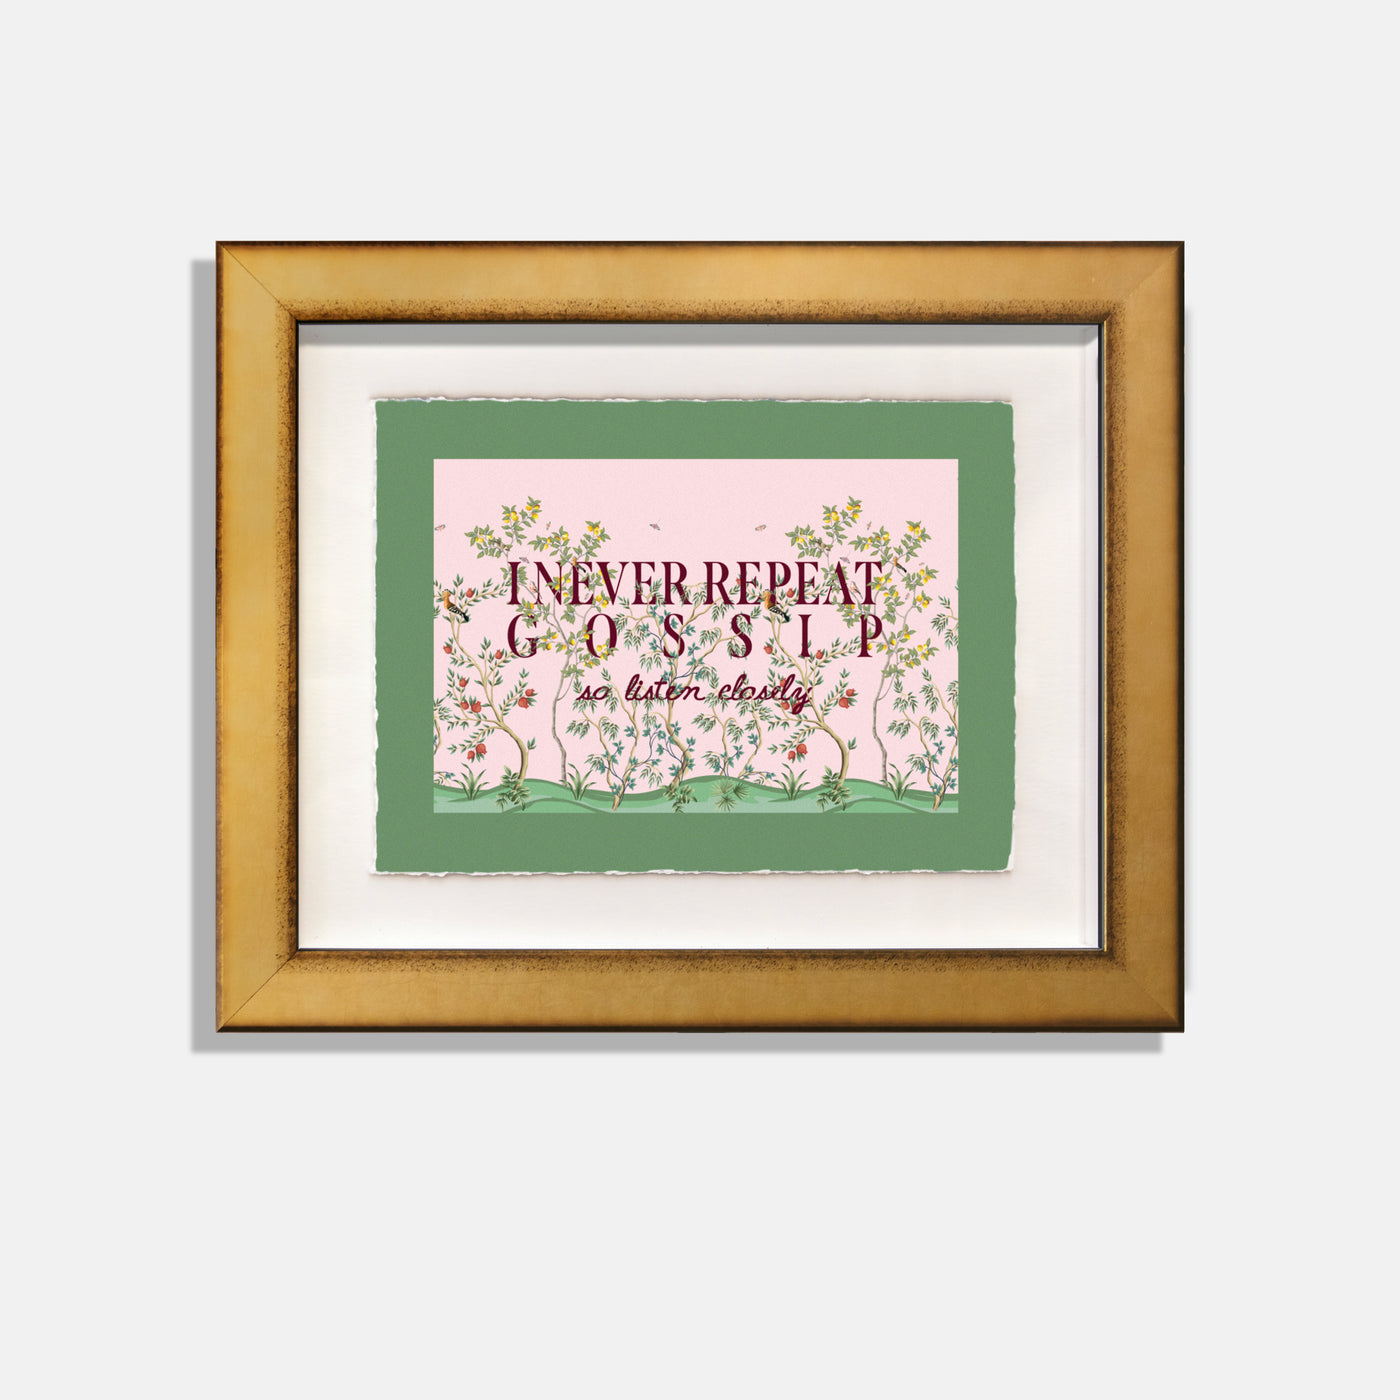 Floral print with green border printed on watercolor paper.  I never repeat gossip, so listen closely.